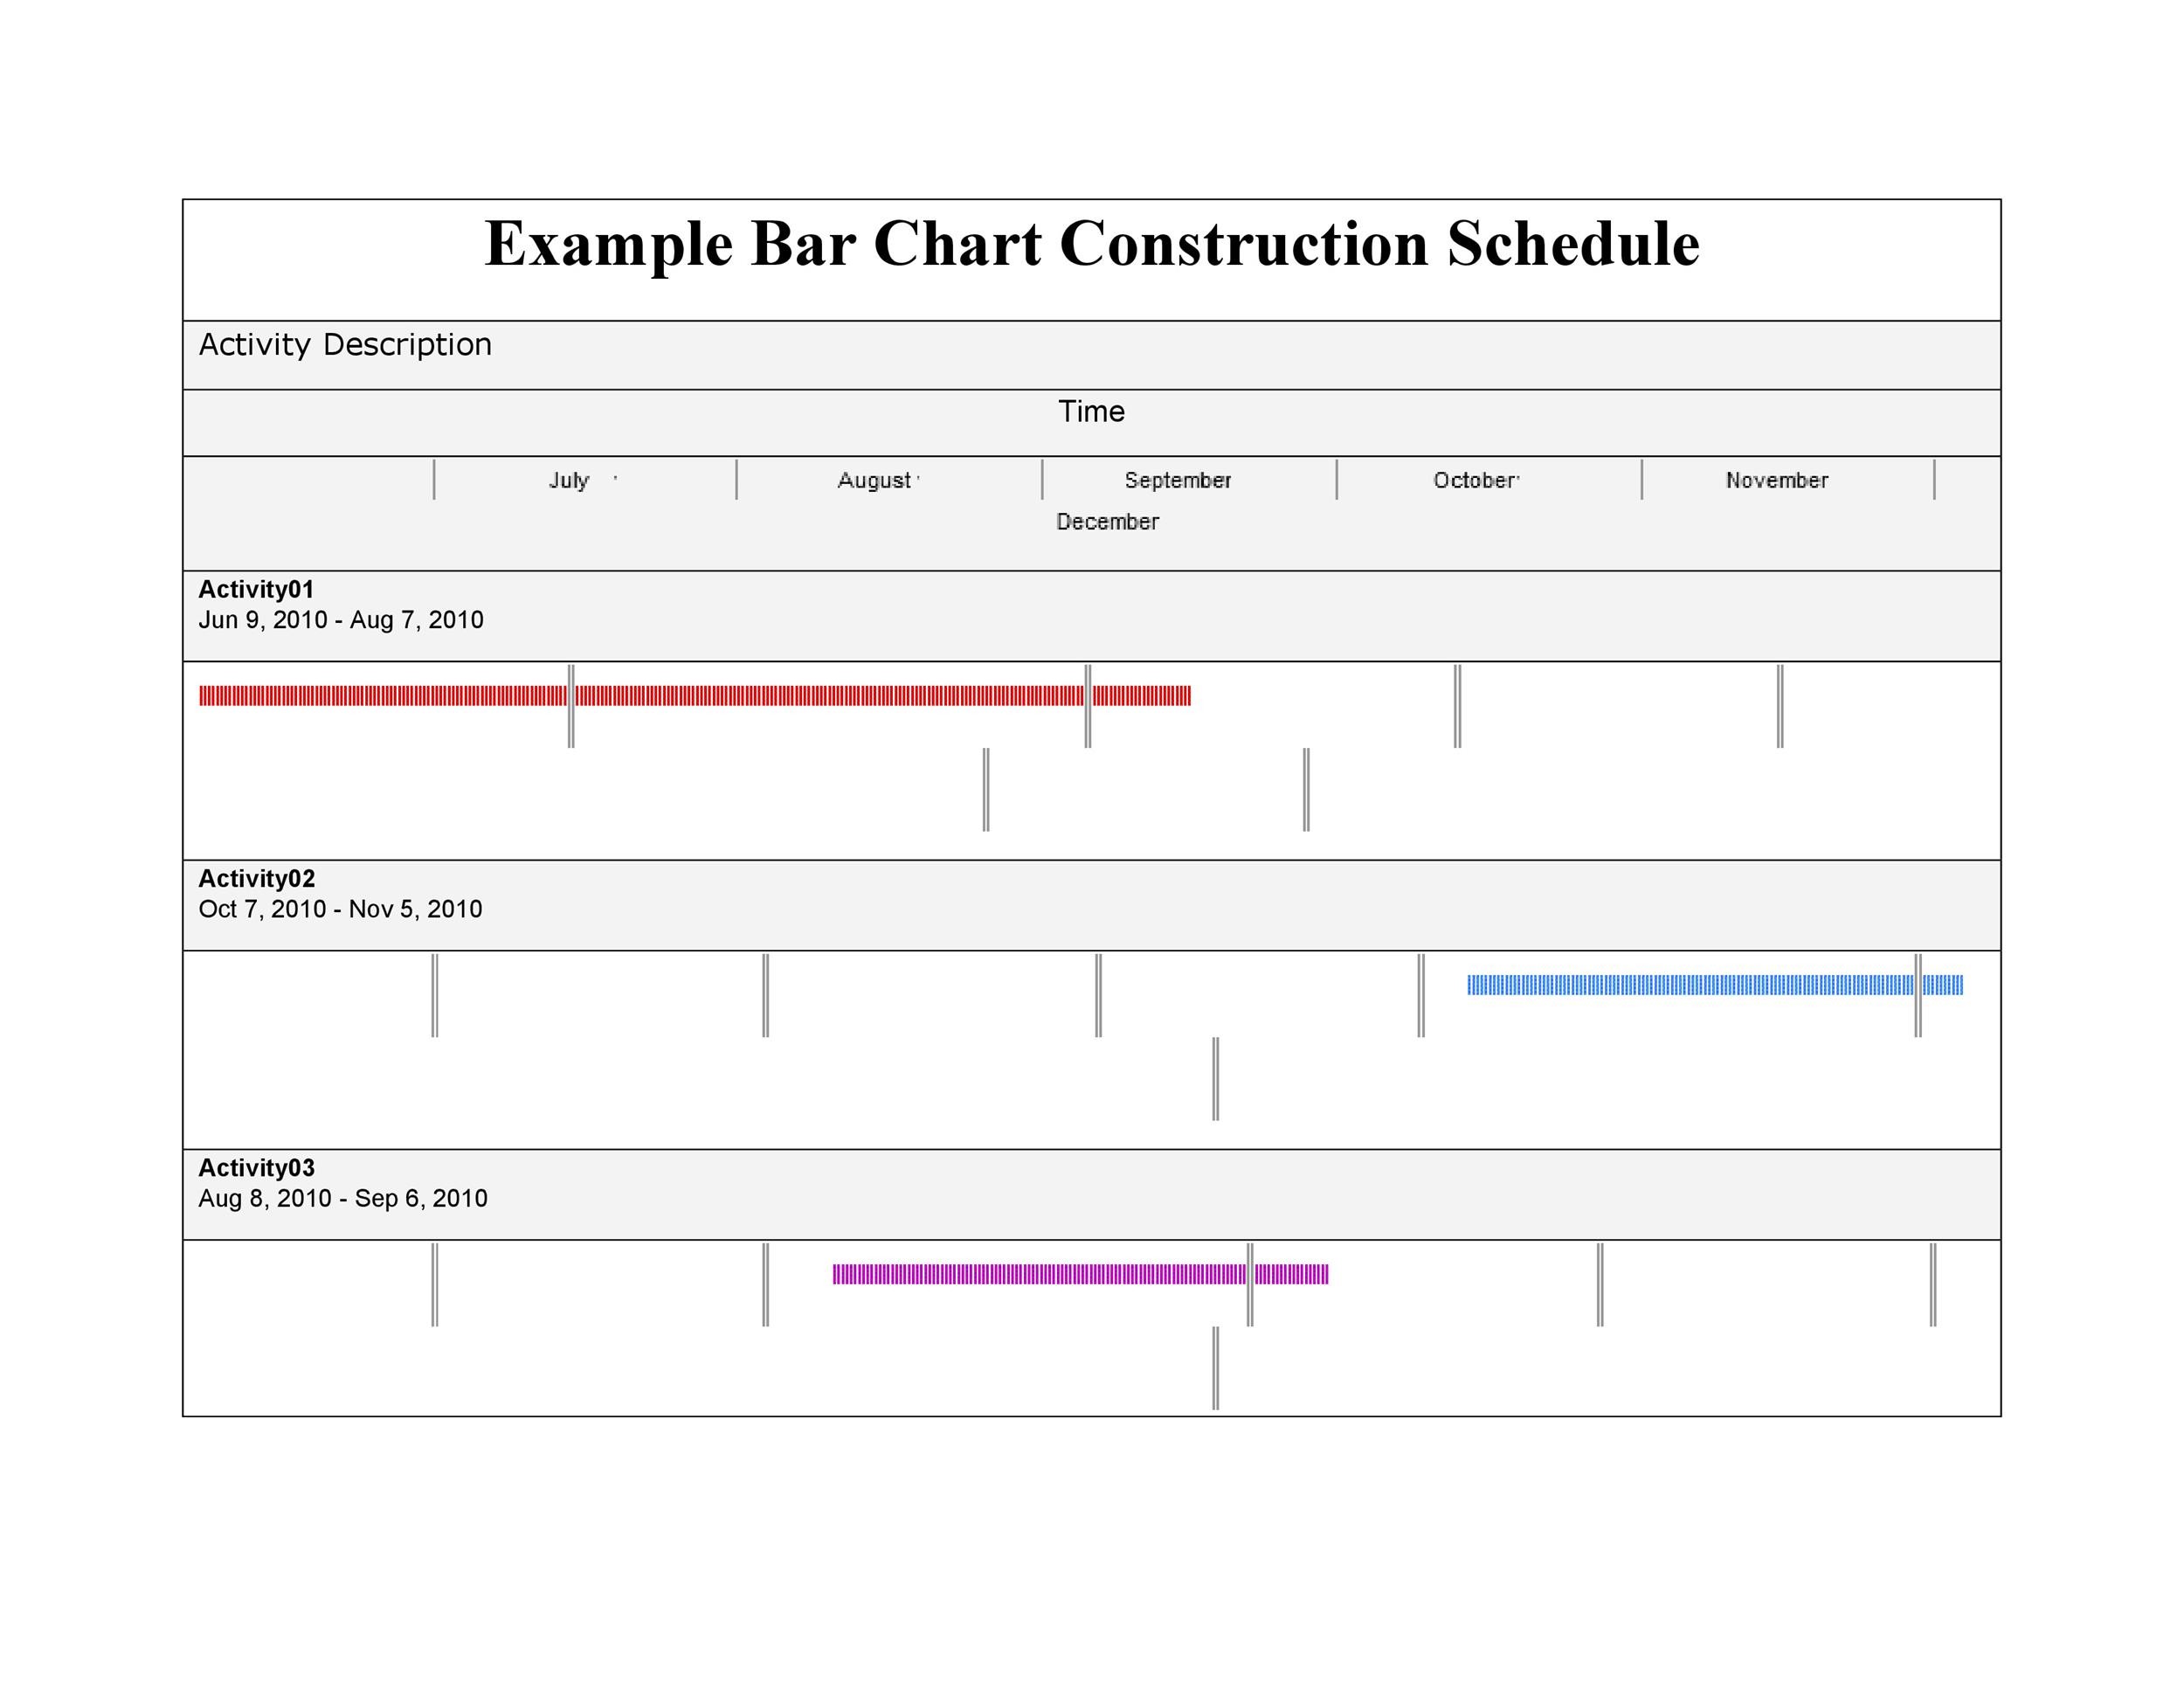 Construction Schedule Bar Chart Free Download